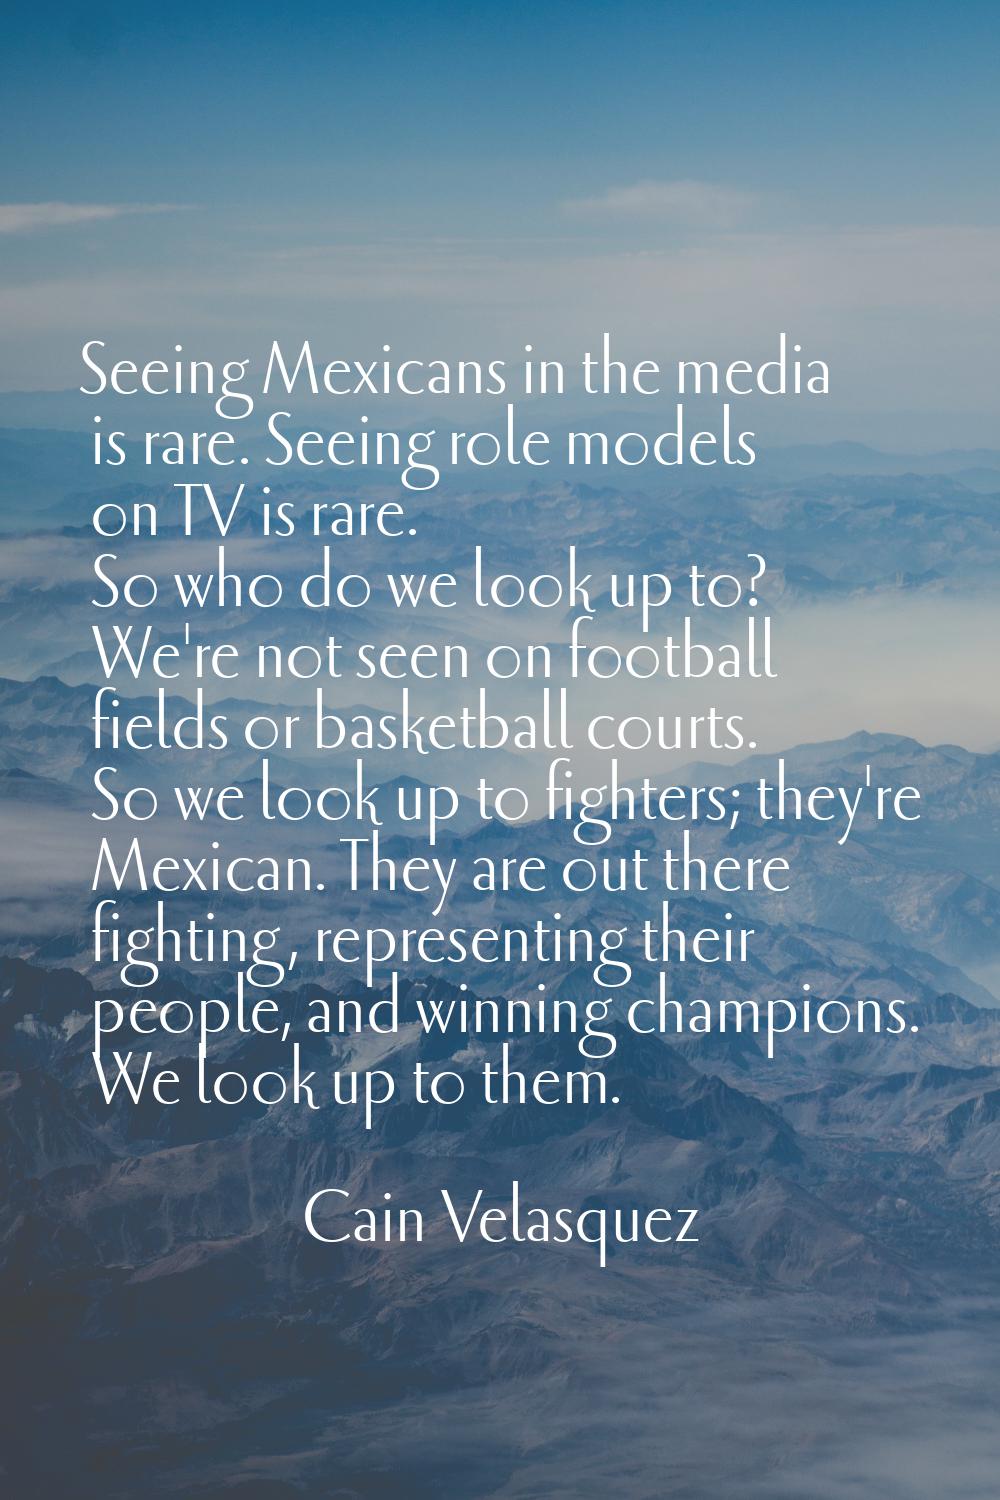 Seeing Mexicans in the media is rare. Seeing role models on TV is rare. So who do we look up to? We